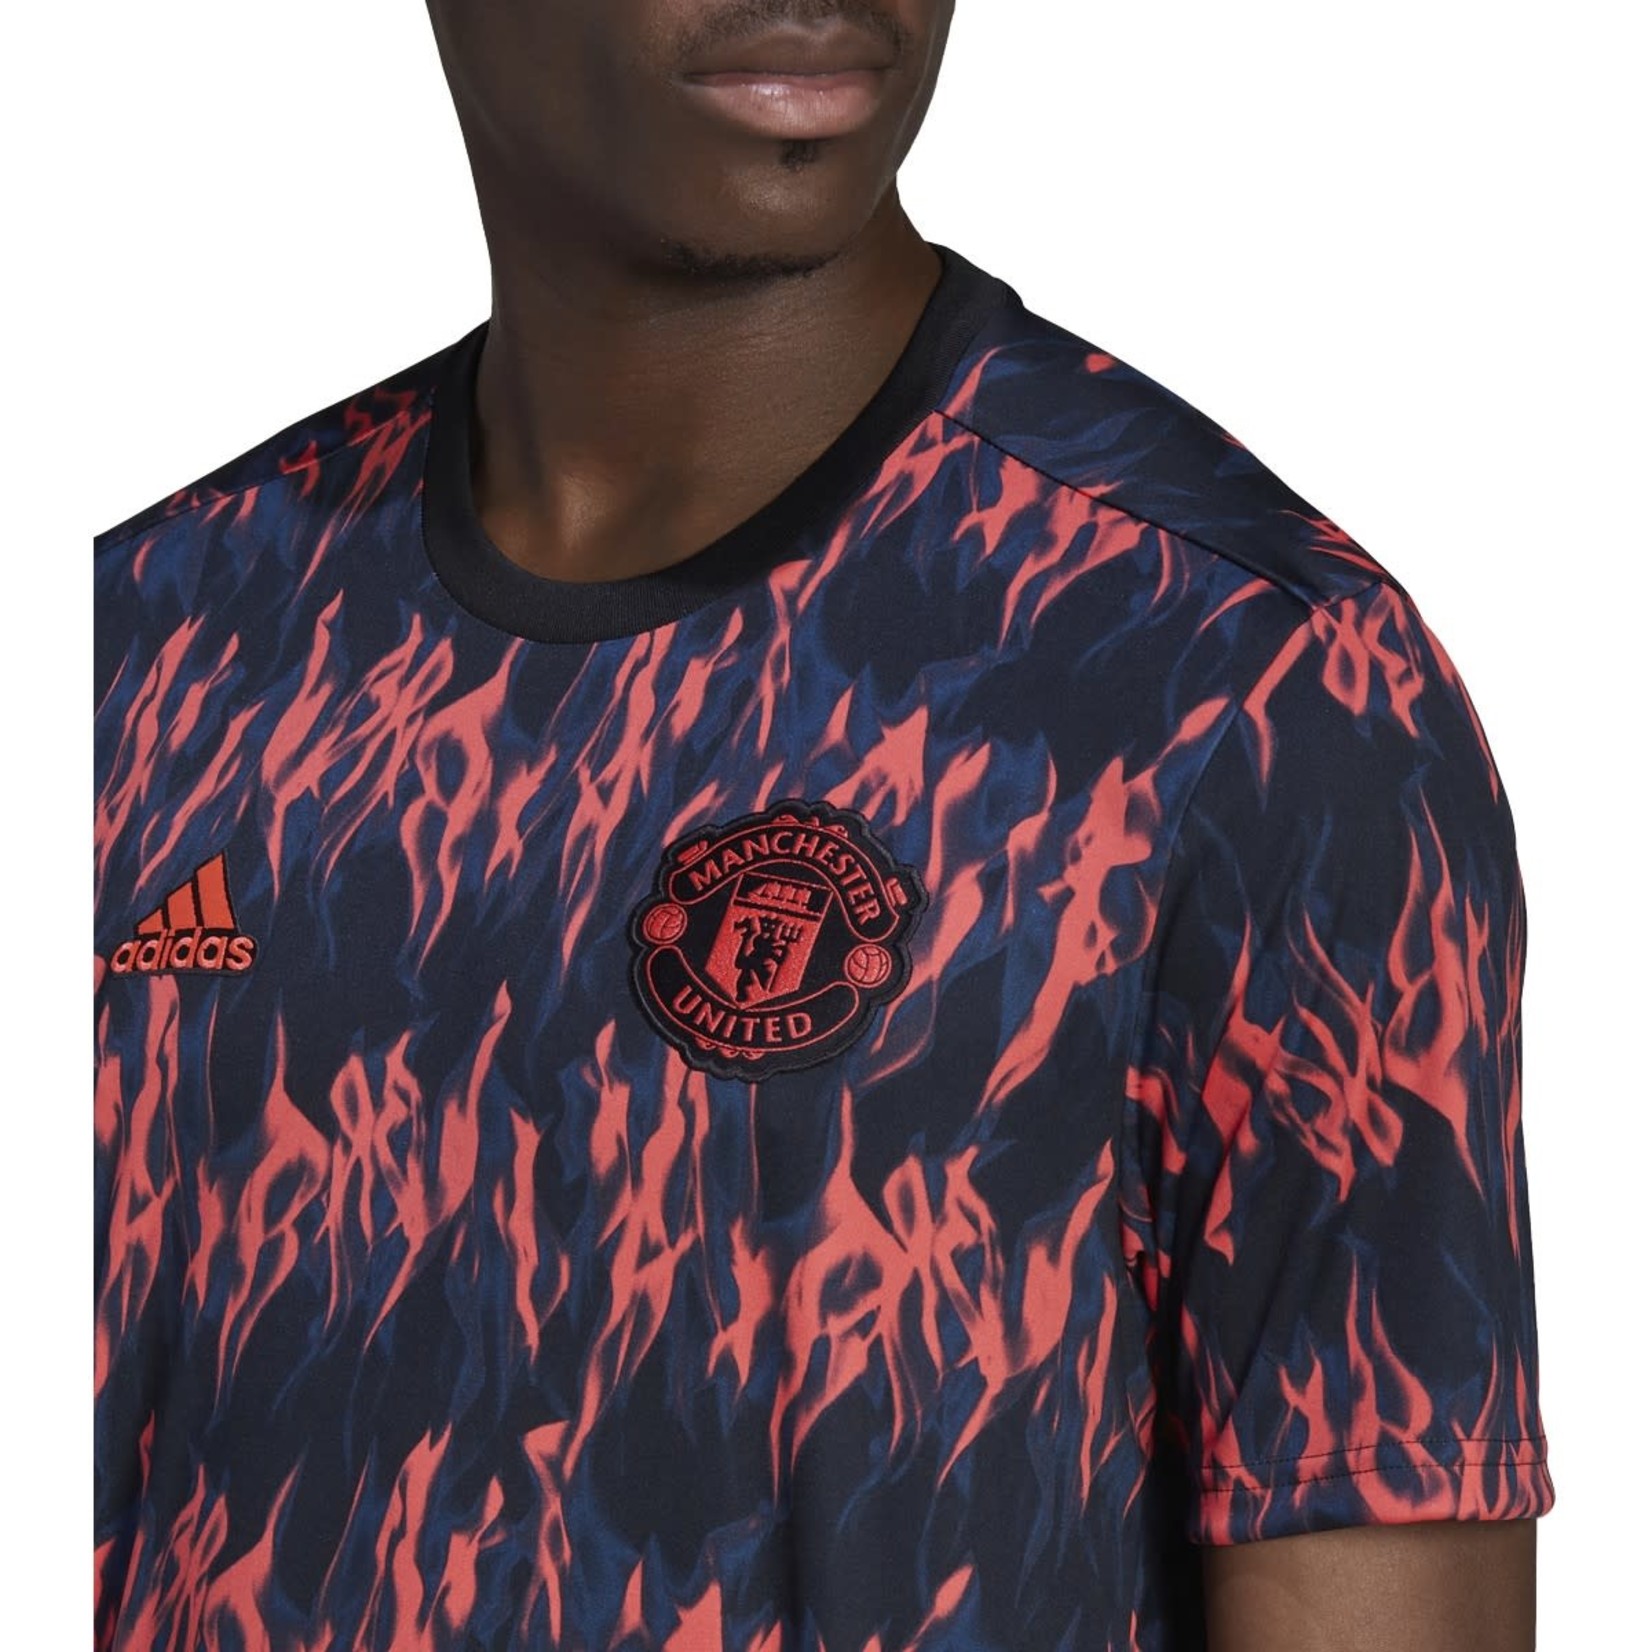 ADIDAS MANCHESTER UNITED 21/22 PREMATCH JERSEY (BLACK/RED)